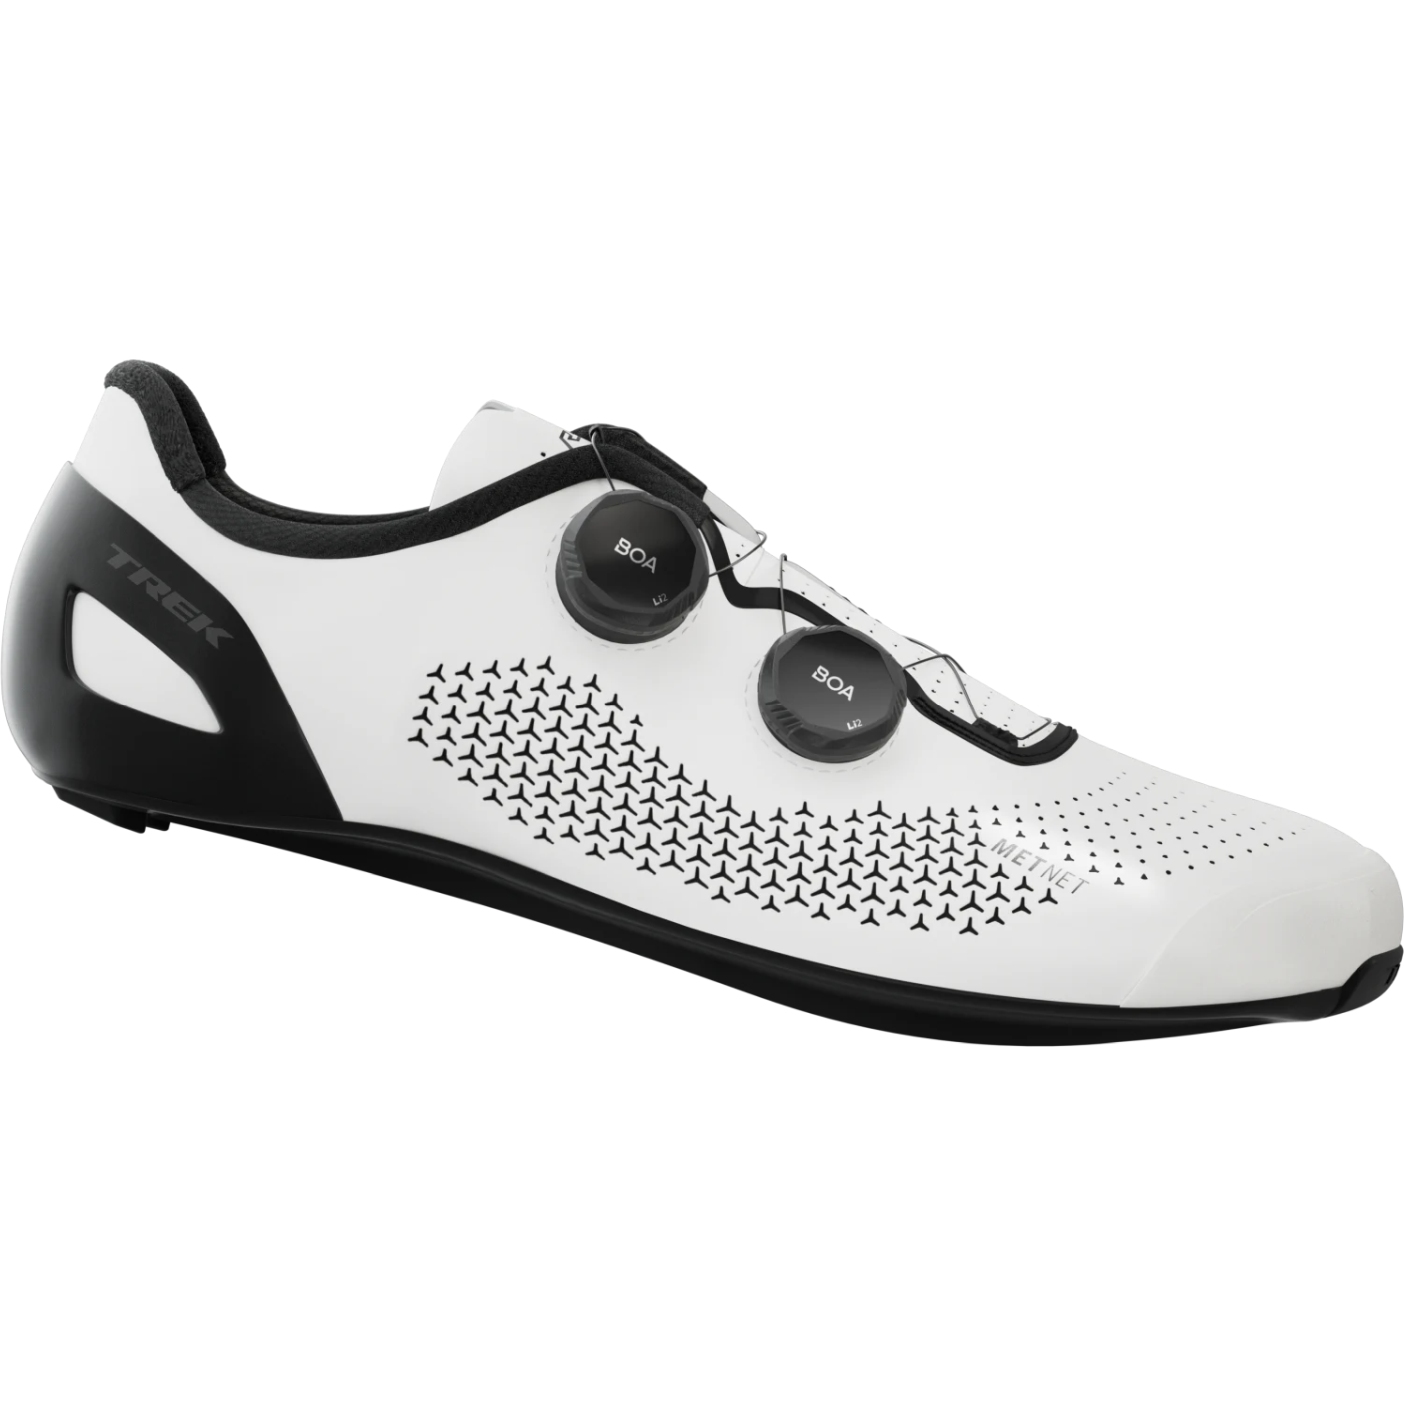 Picture of Trek RSL Road Cycling Shoes - White